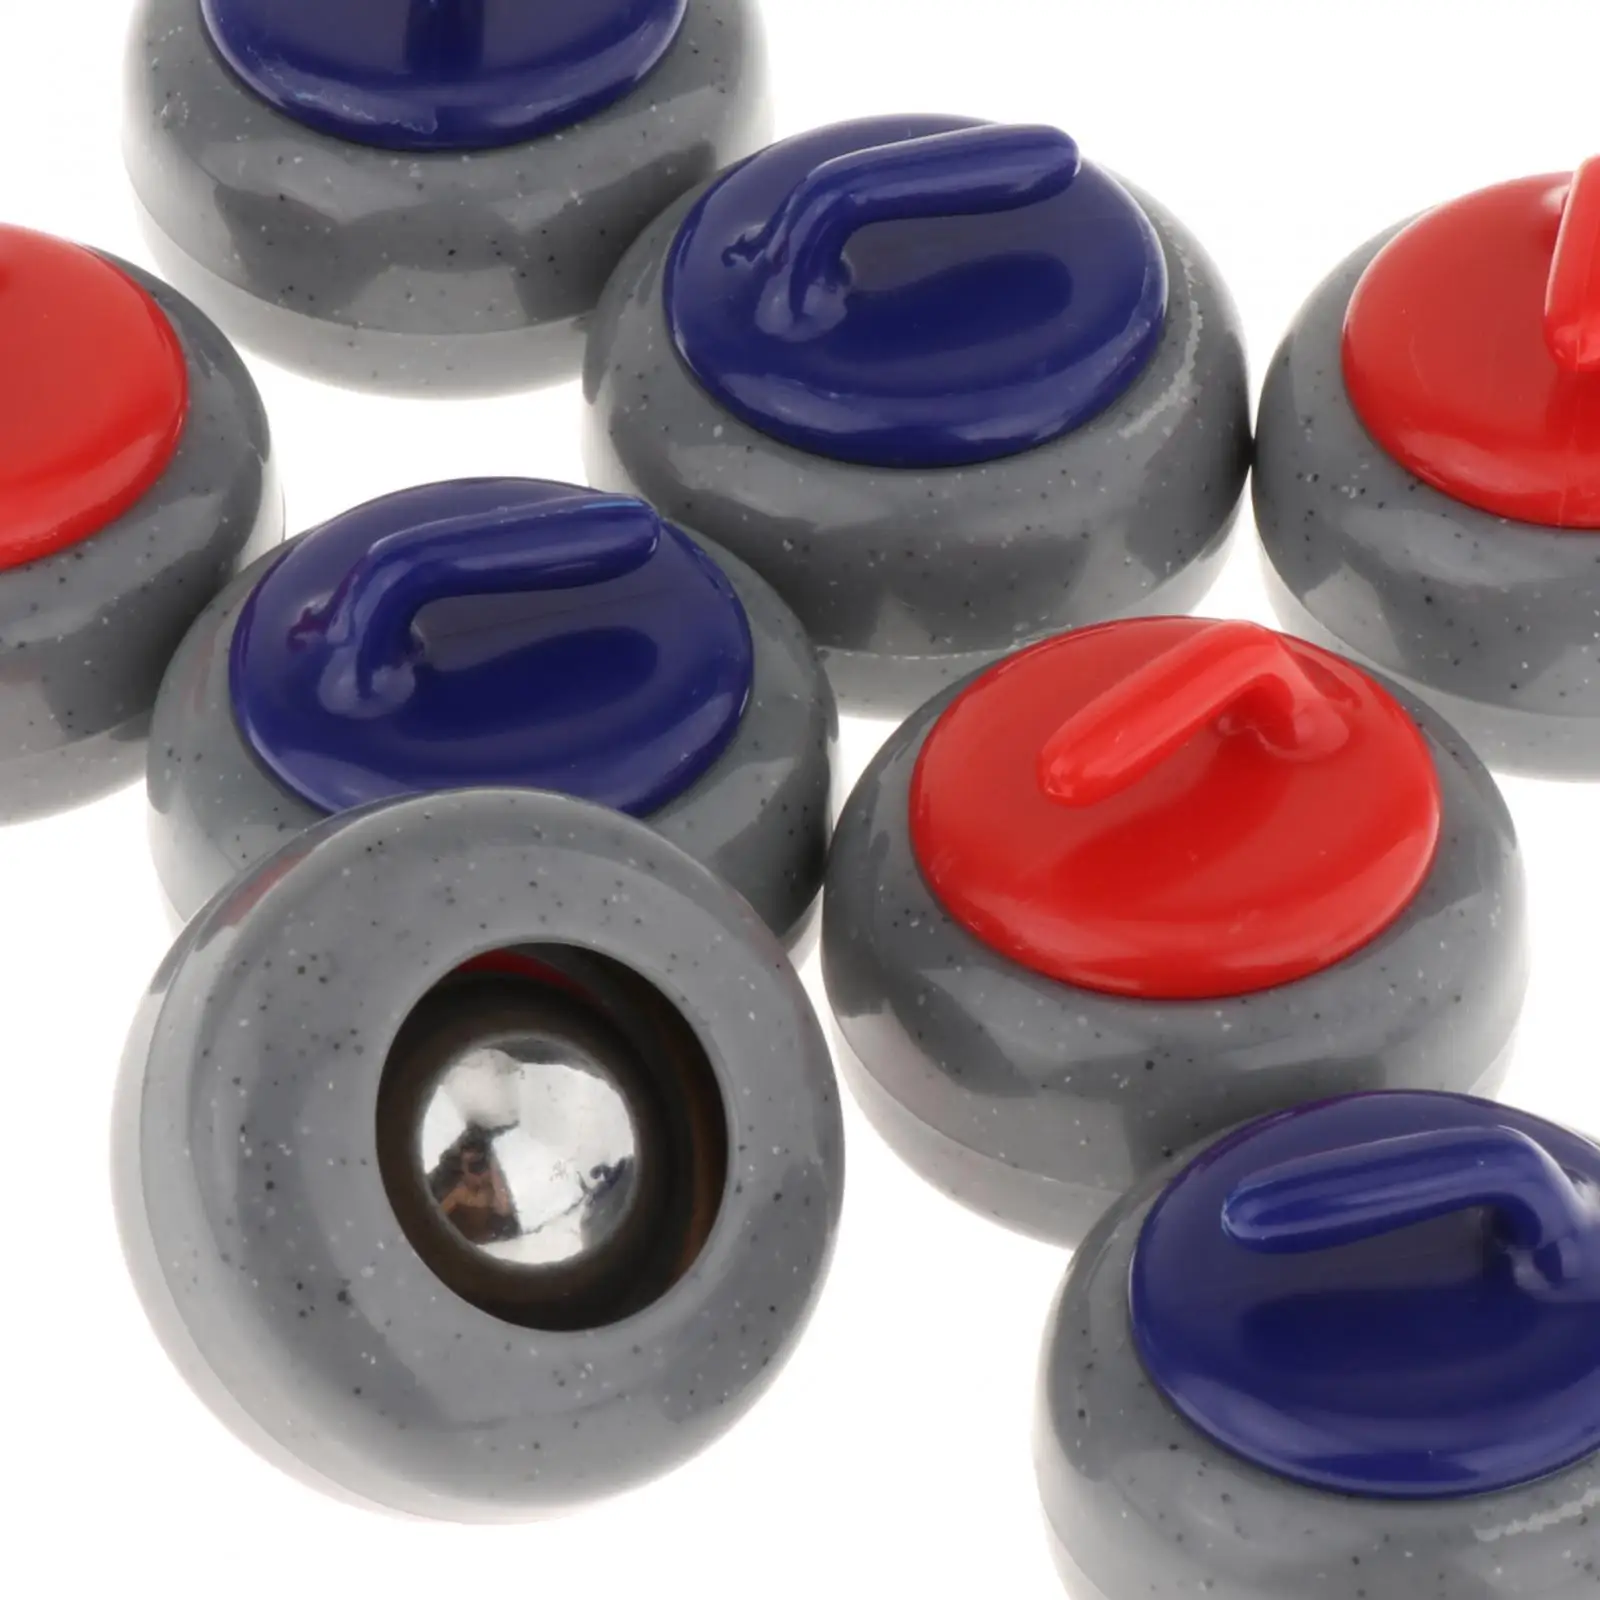 8x Tabletop Curling Game Pucks Floating Curling Ball Kids Adults Travel Portable Sports Toy Replacement Shuffleboard Rollers